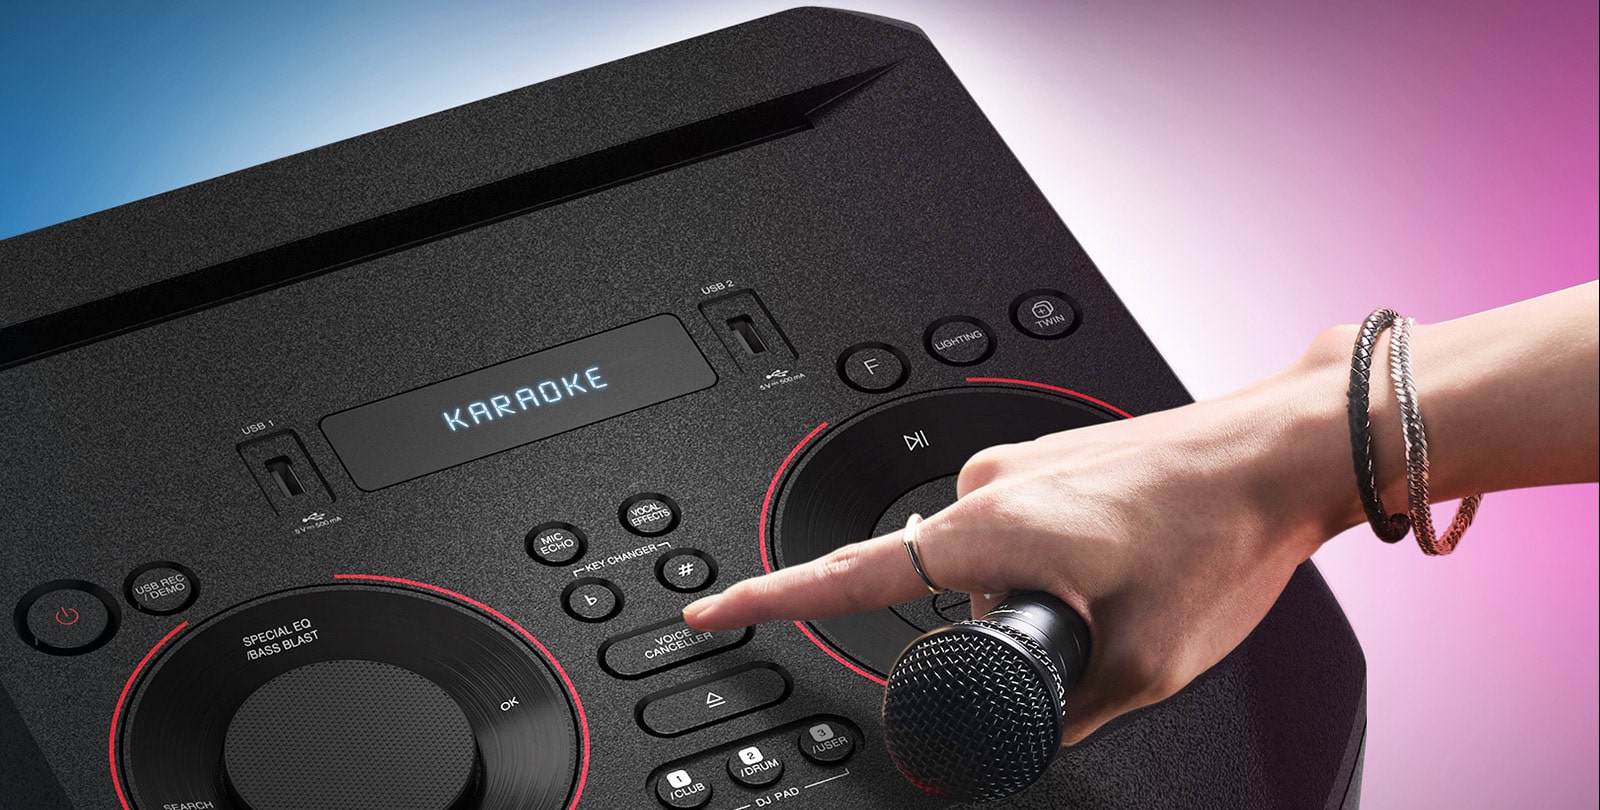 A hand holding a microphone tries to press the vocal mute button on the top of the LG XBOOM.